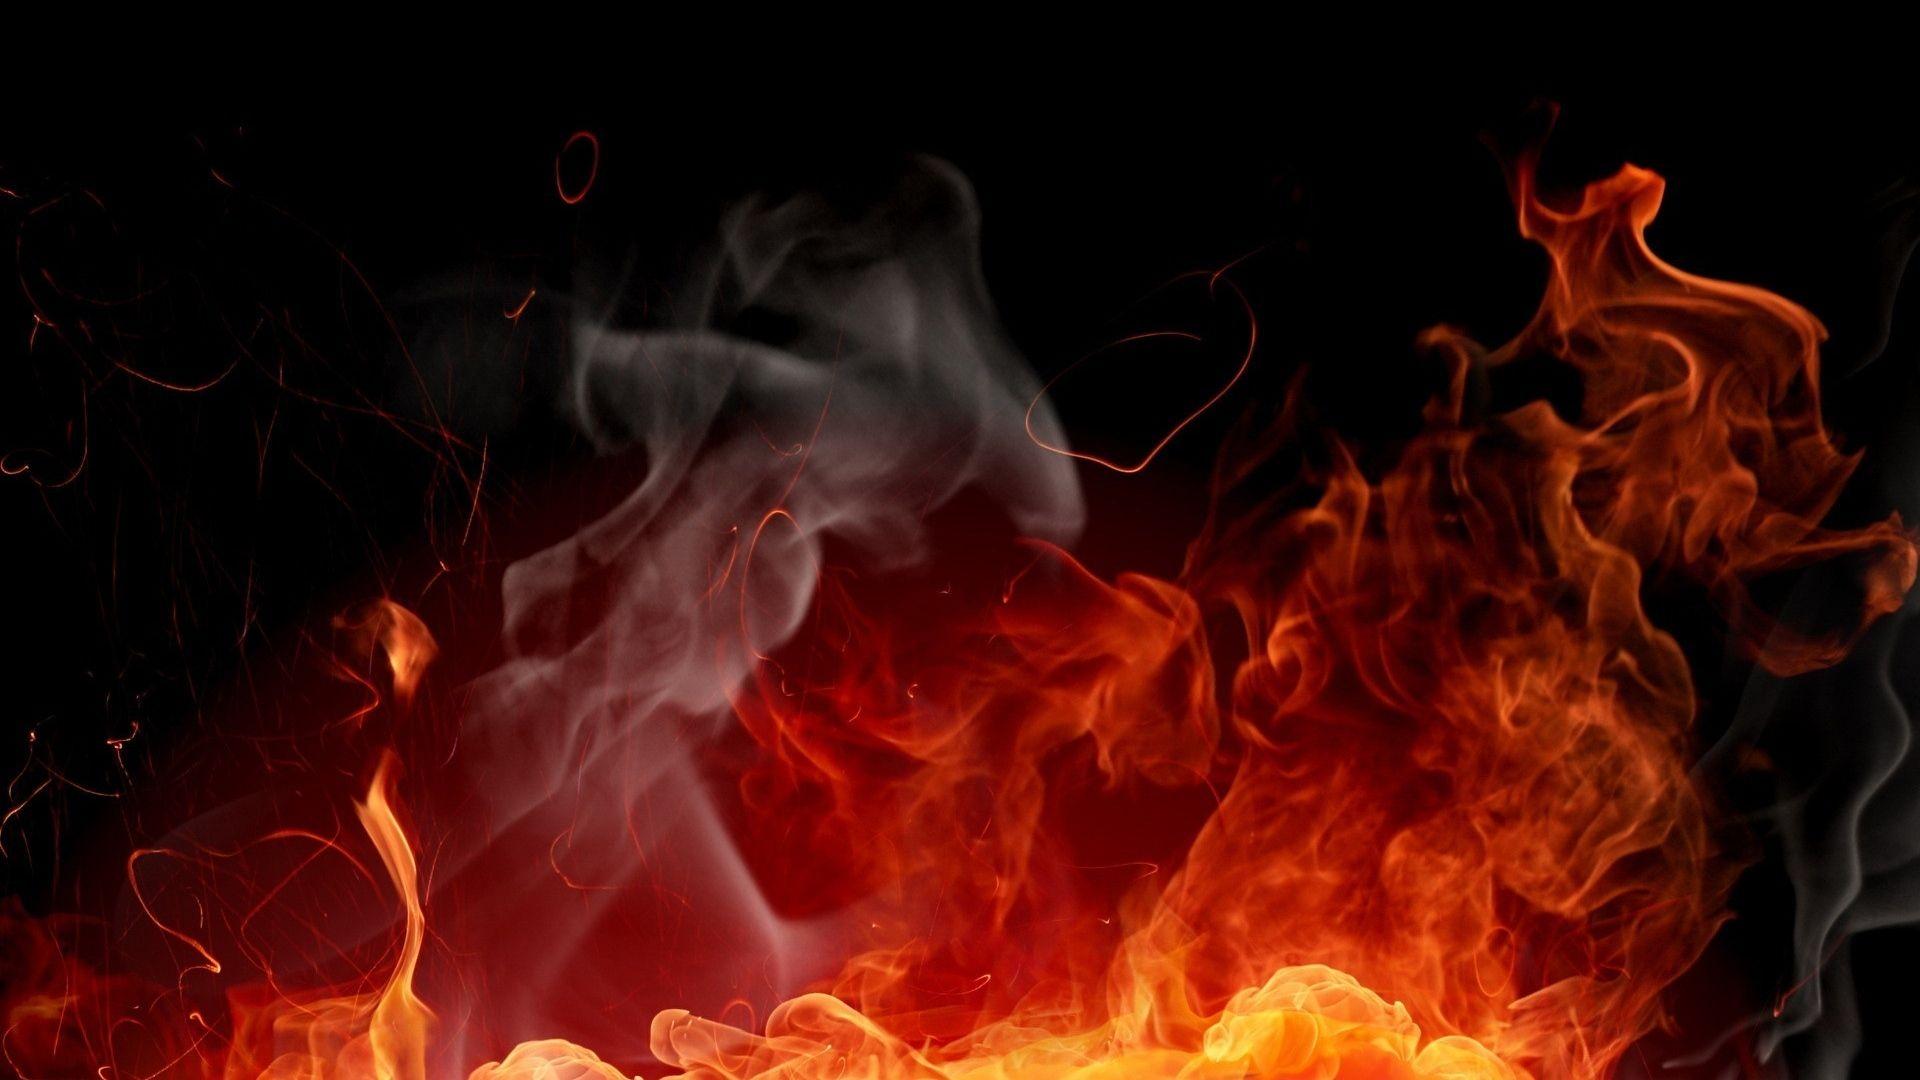 Wallpaper flame burn spark smoke background 1920x1080. Fire art, Wallpaper gallery, Abstract photography